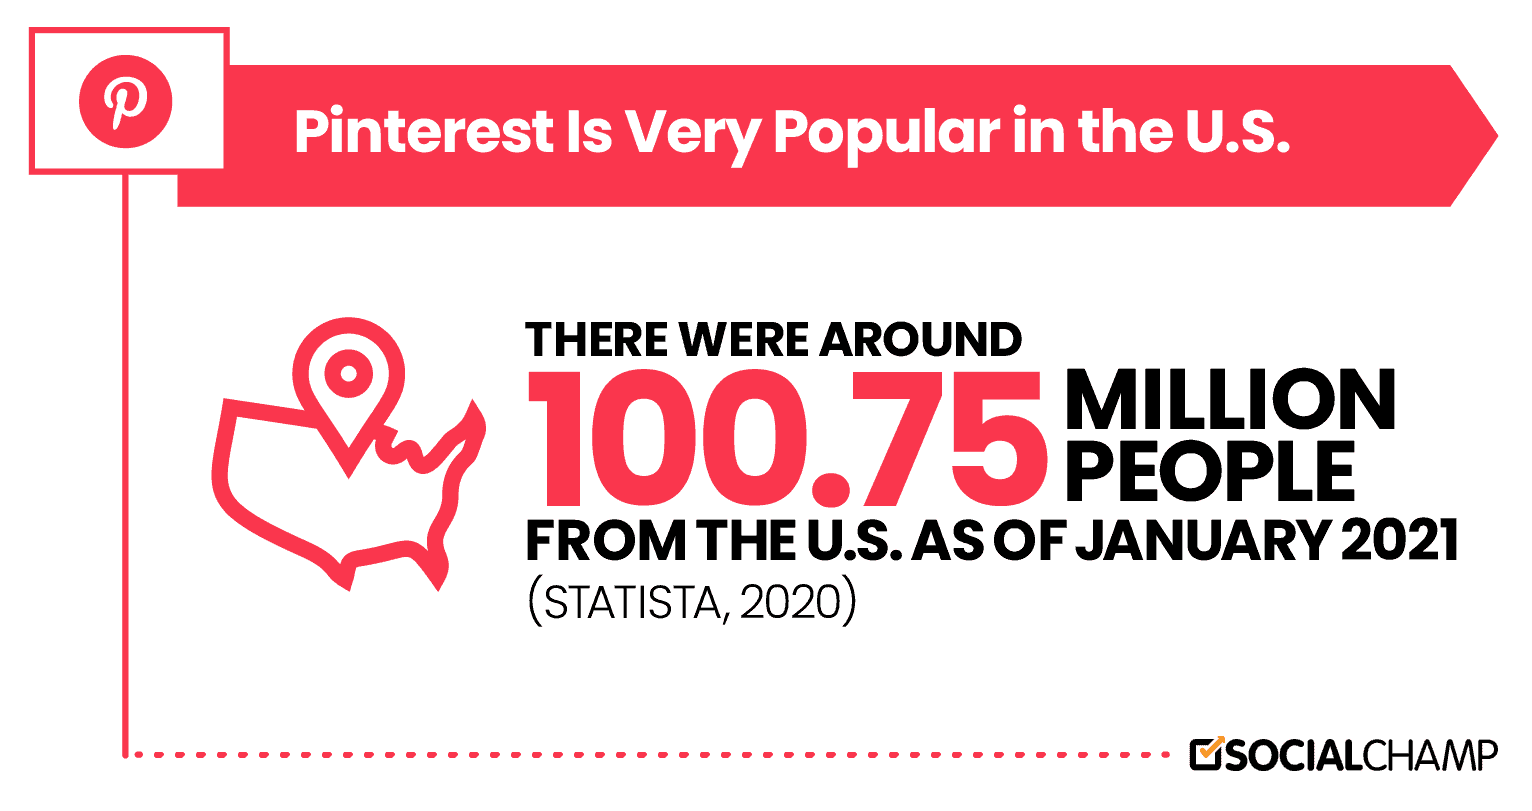 100.75 Million Users Are From the U.S.